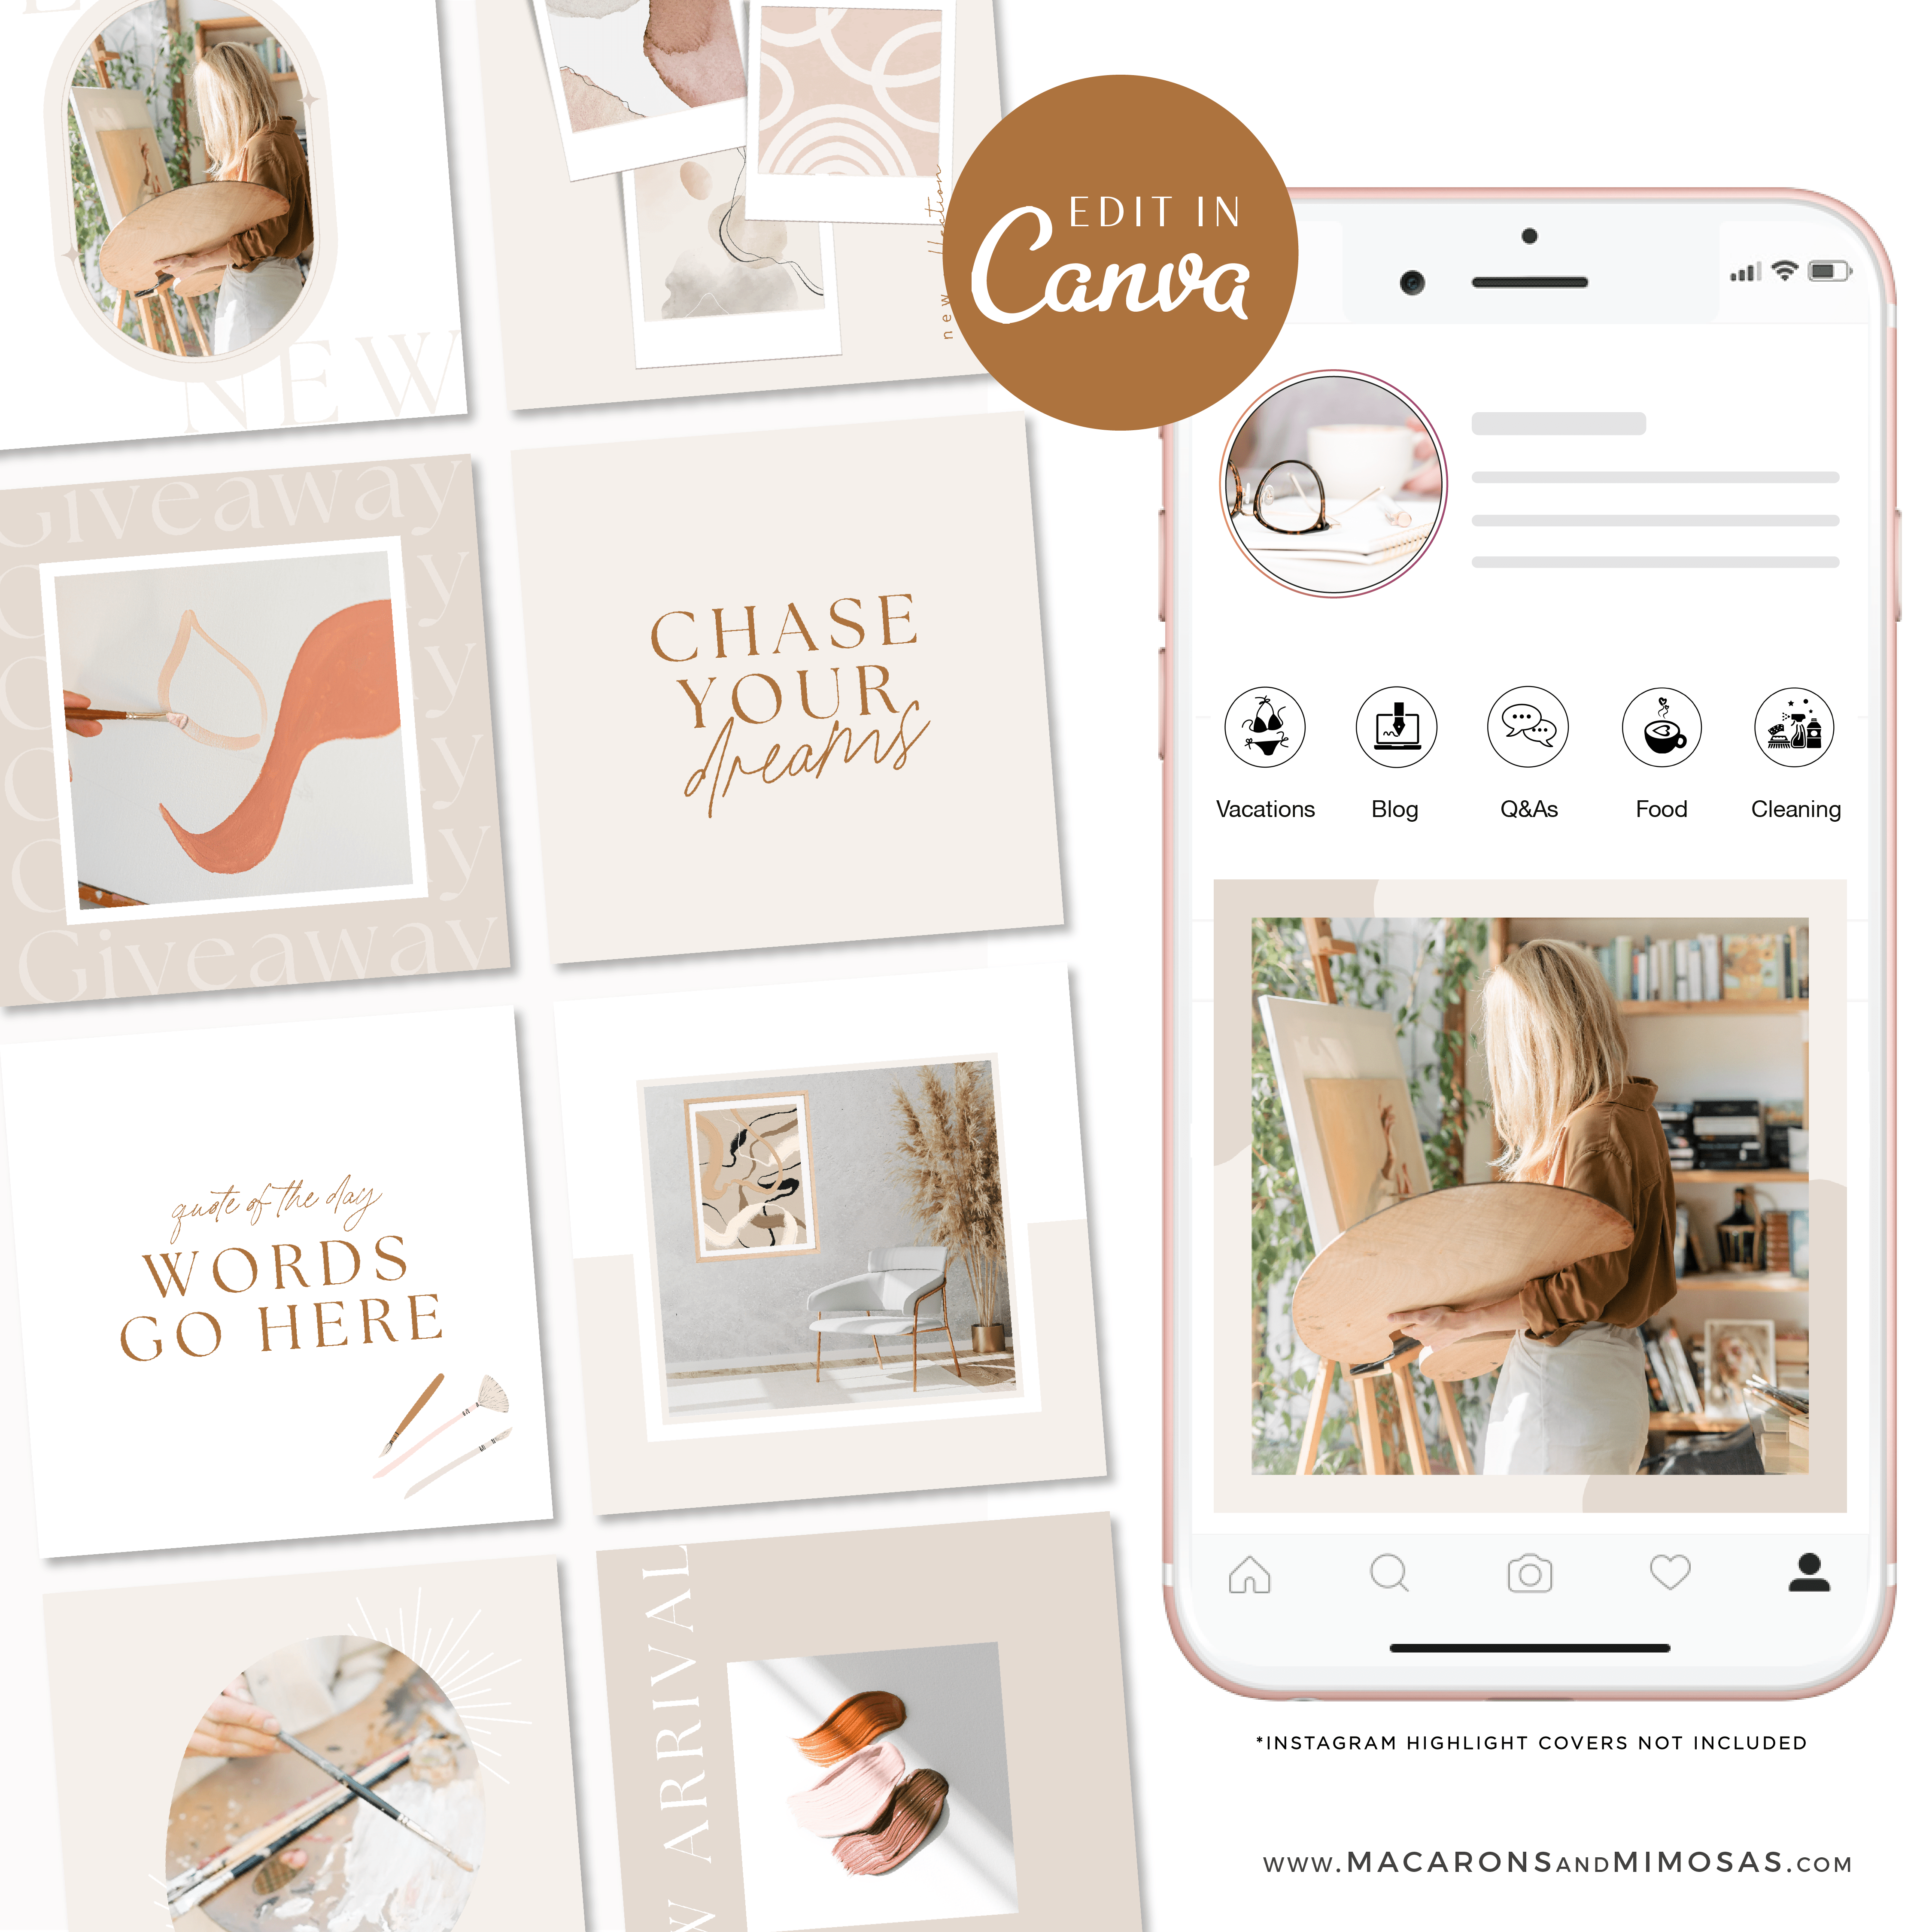 Art Gallery Artist Instagram Post Templates Canva, Art Quotes for Instagram, Creative Instagram Templates, Art Store Canva Designs, Small Business Brand